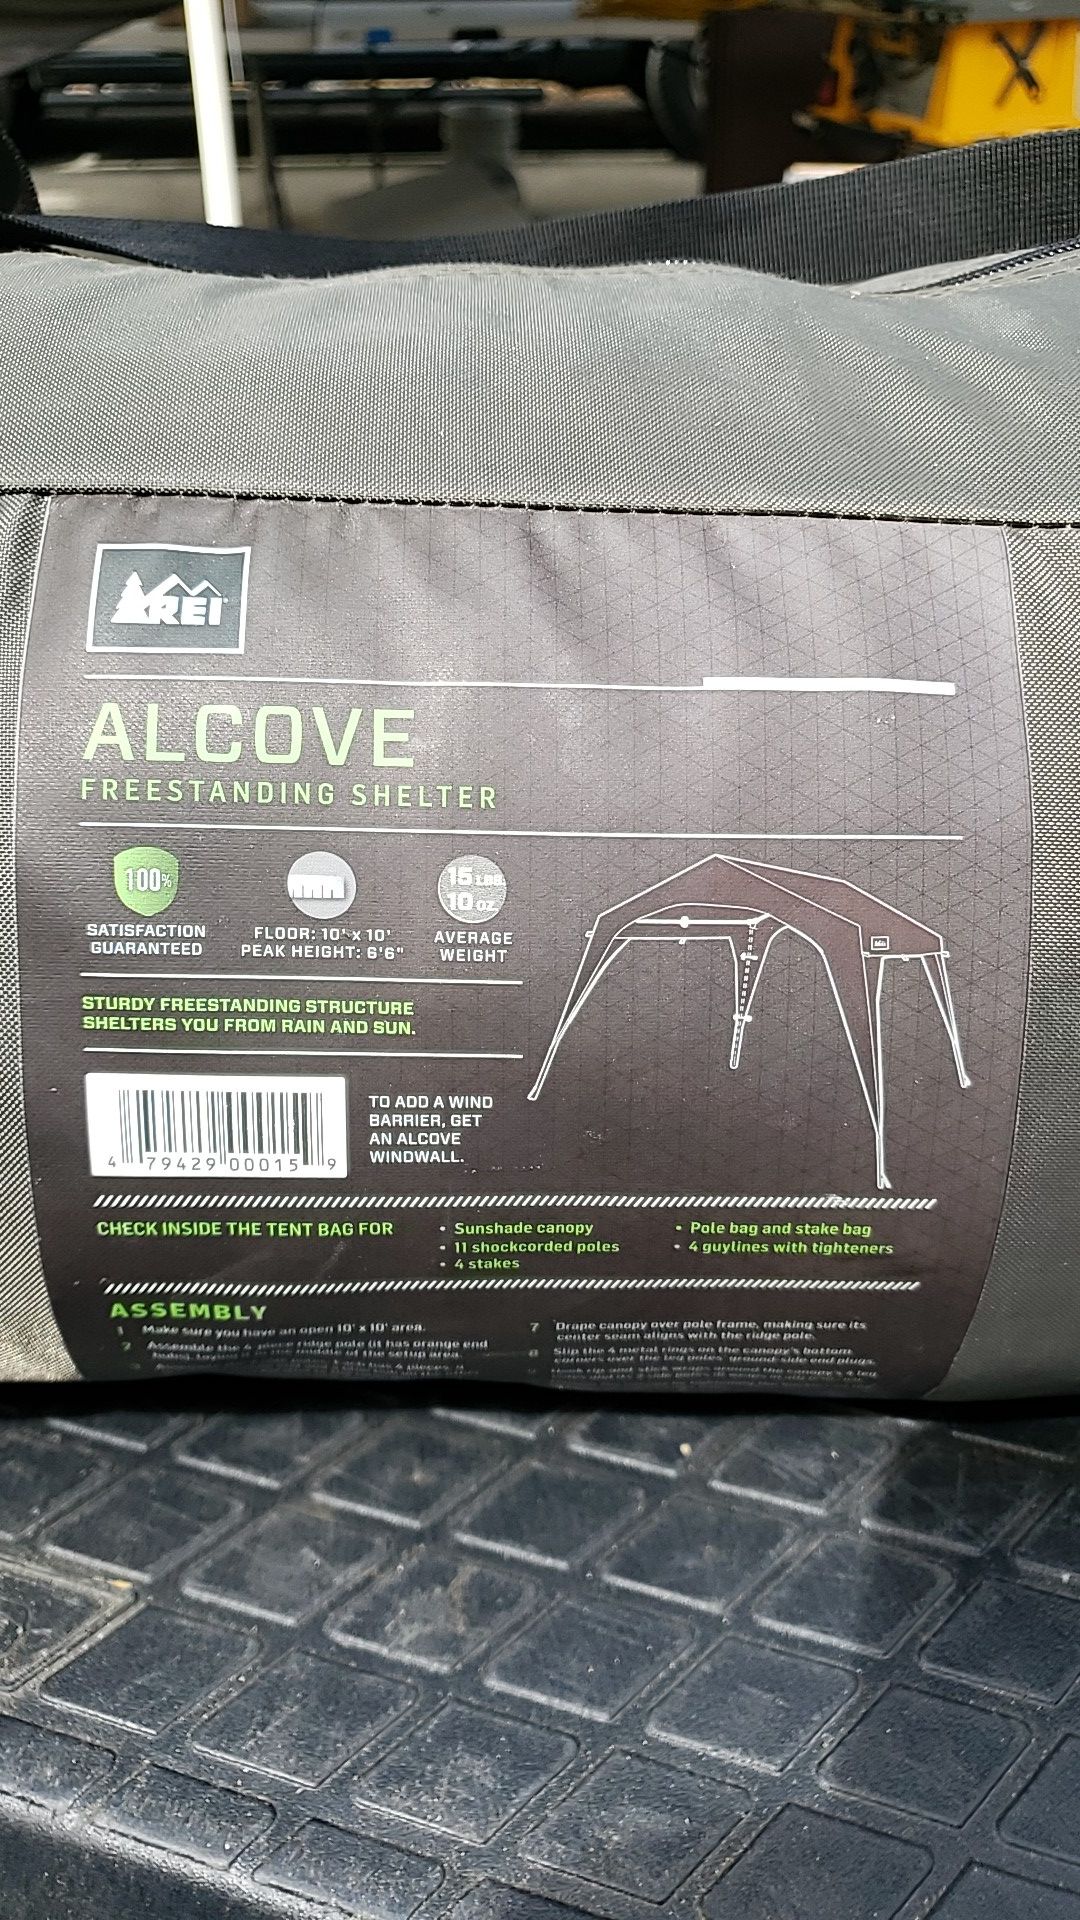 Rei alcove, tent, shelter